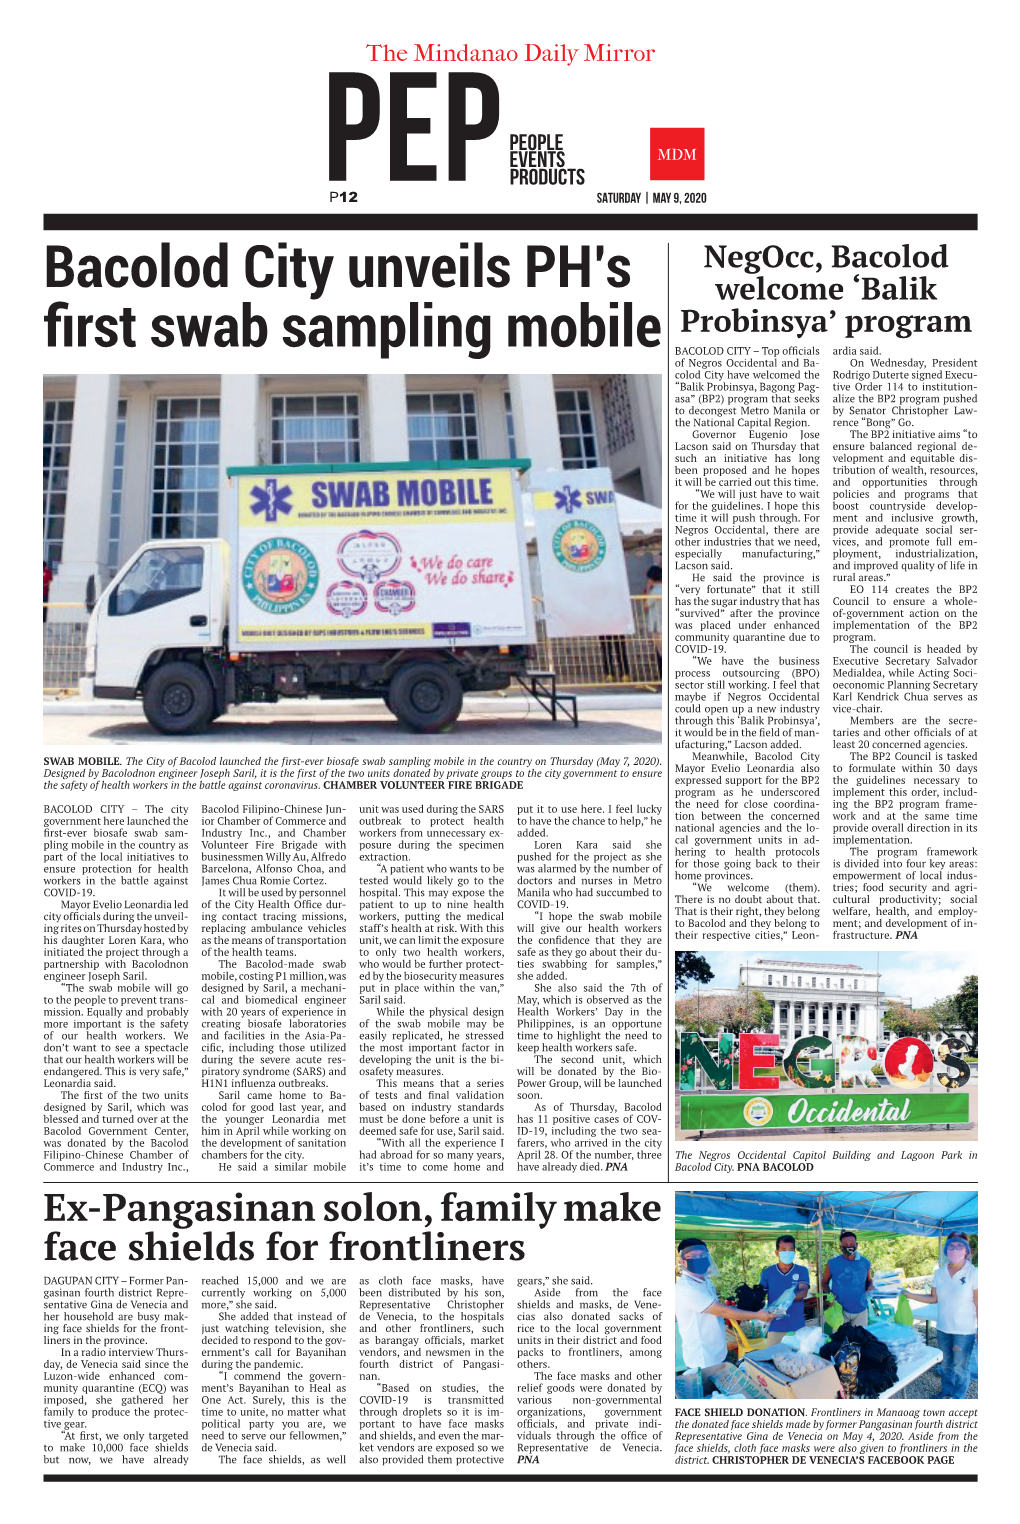 Bacolod City Unveils PH's First Swab Sampling Mobile